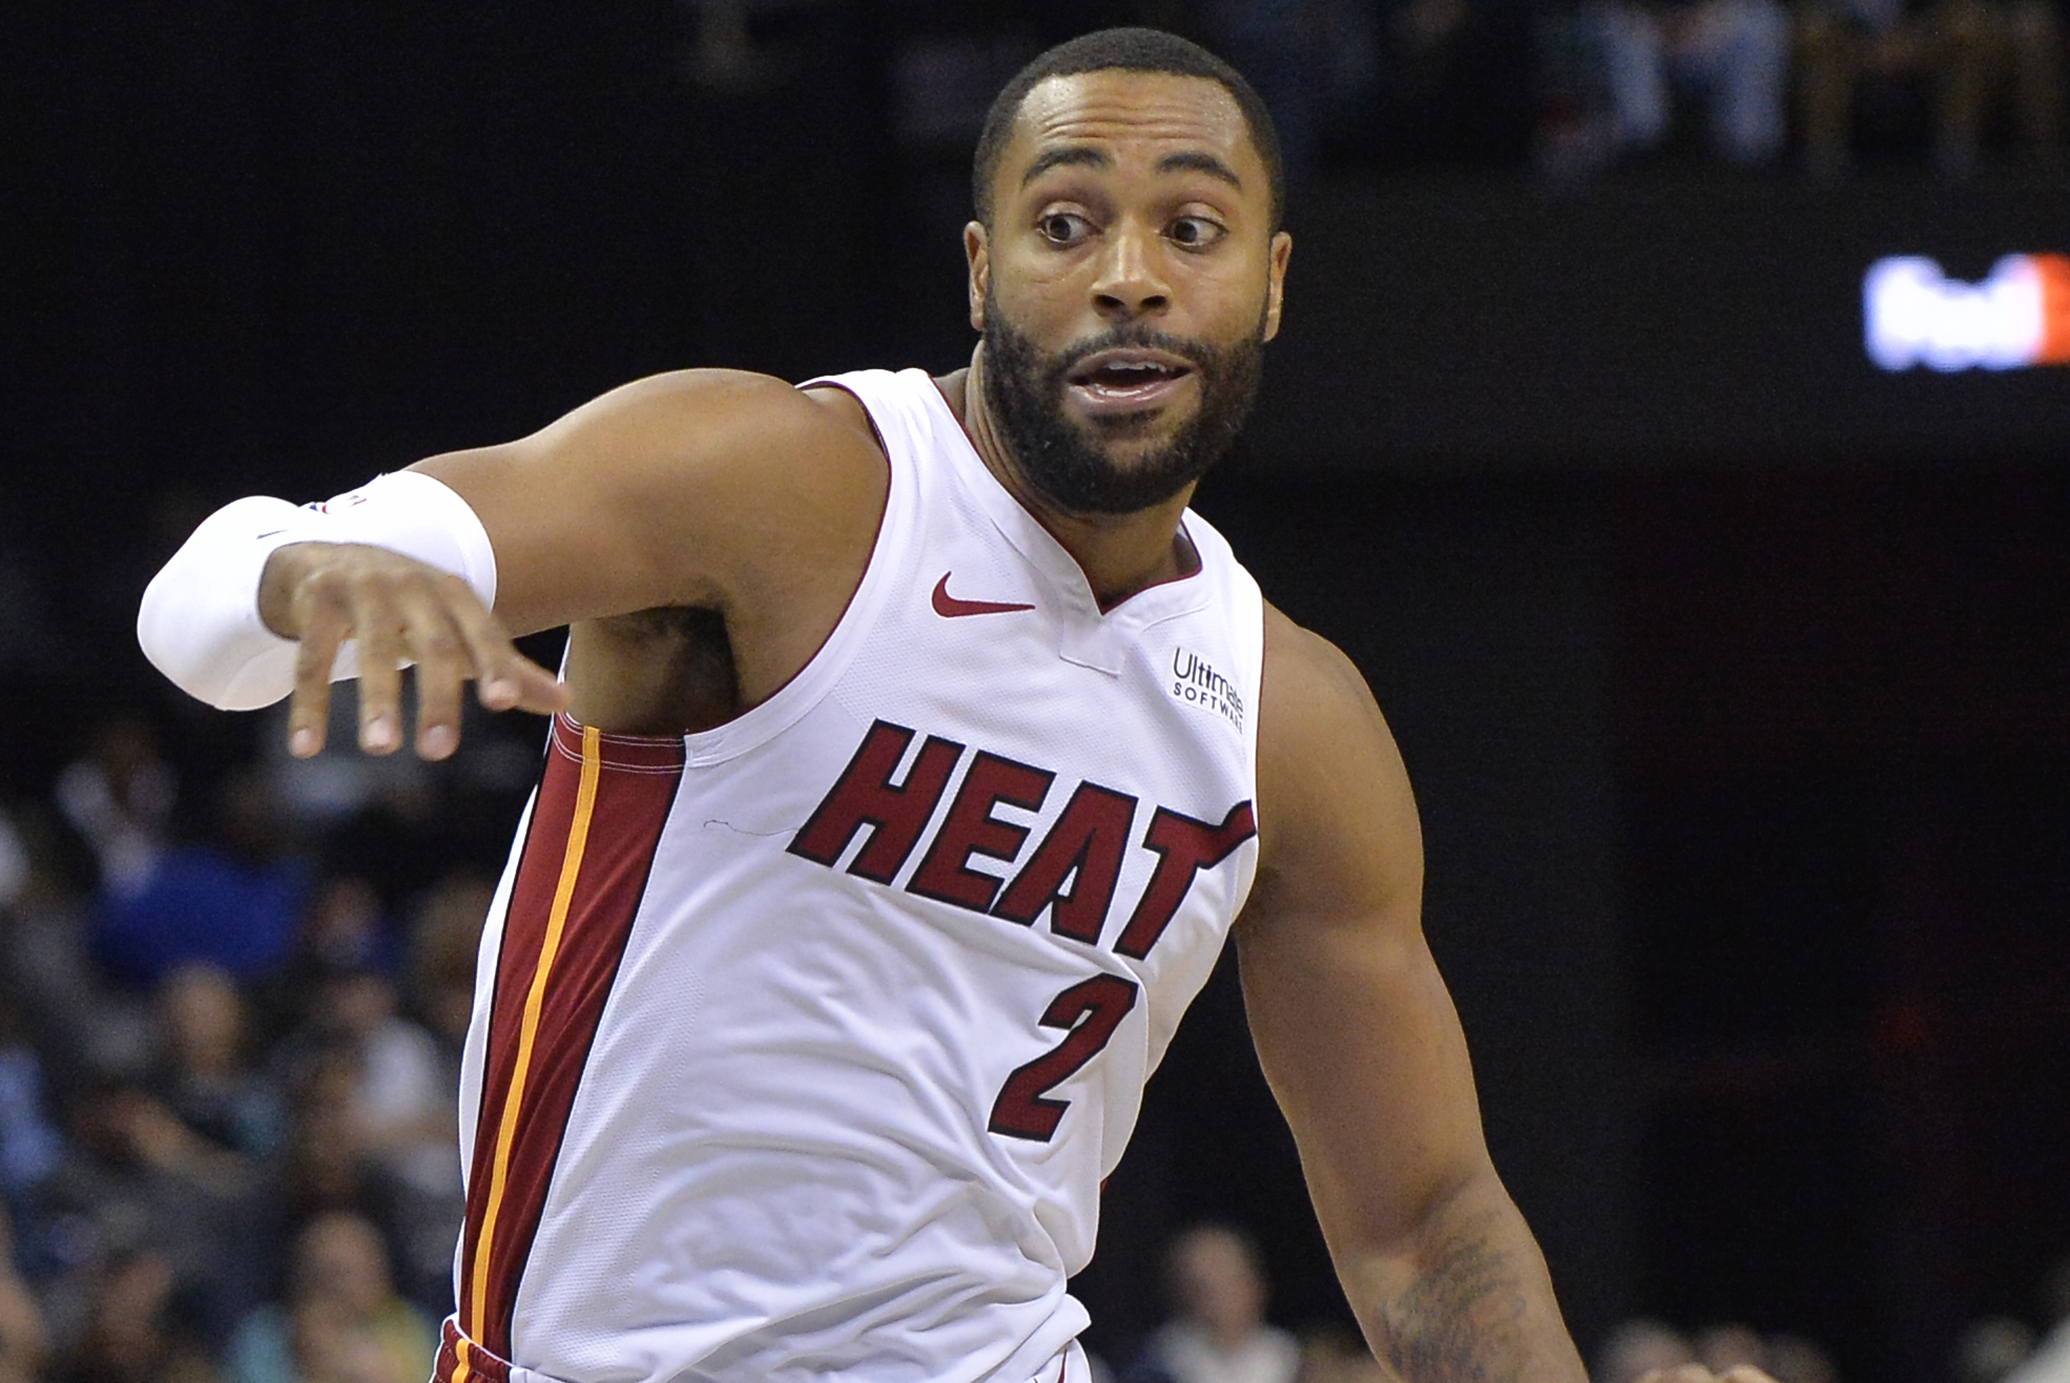 Miami Heat: Are these Wayne Ellington's final games in a Heat jersey?